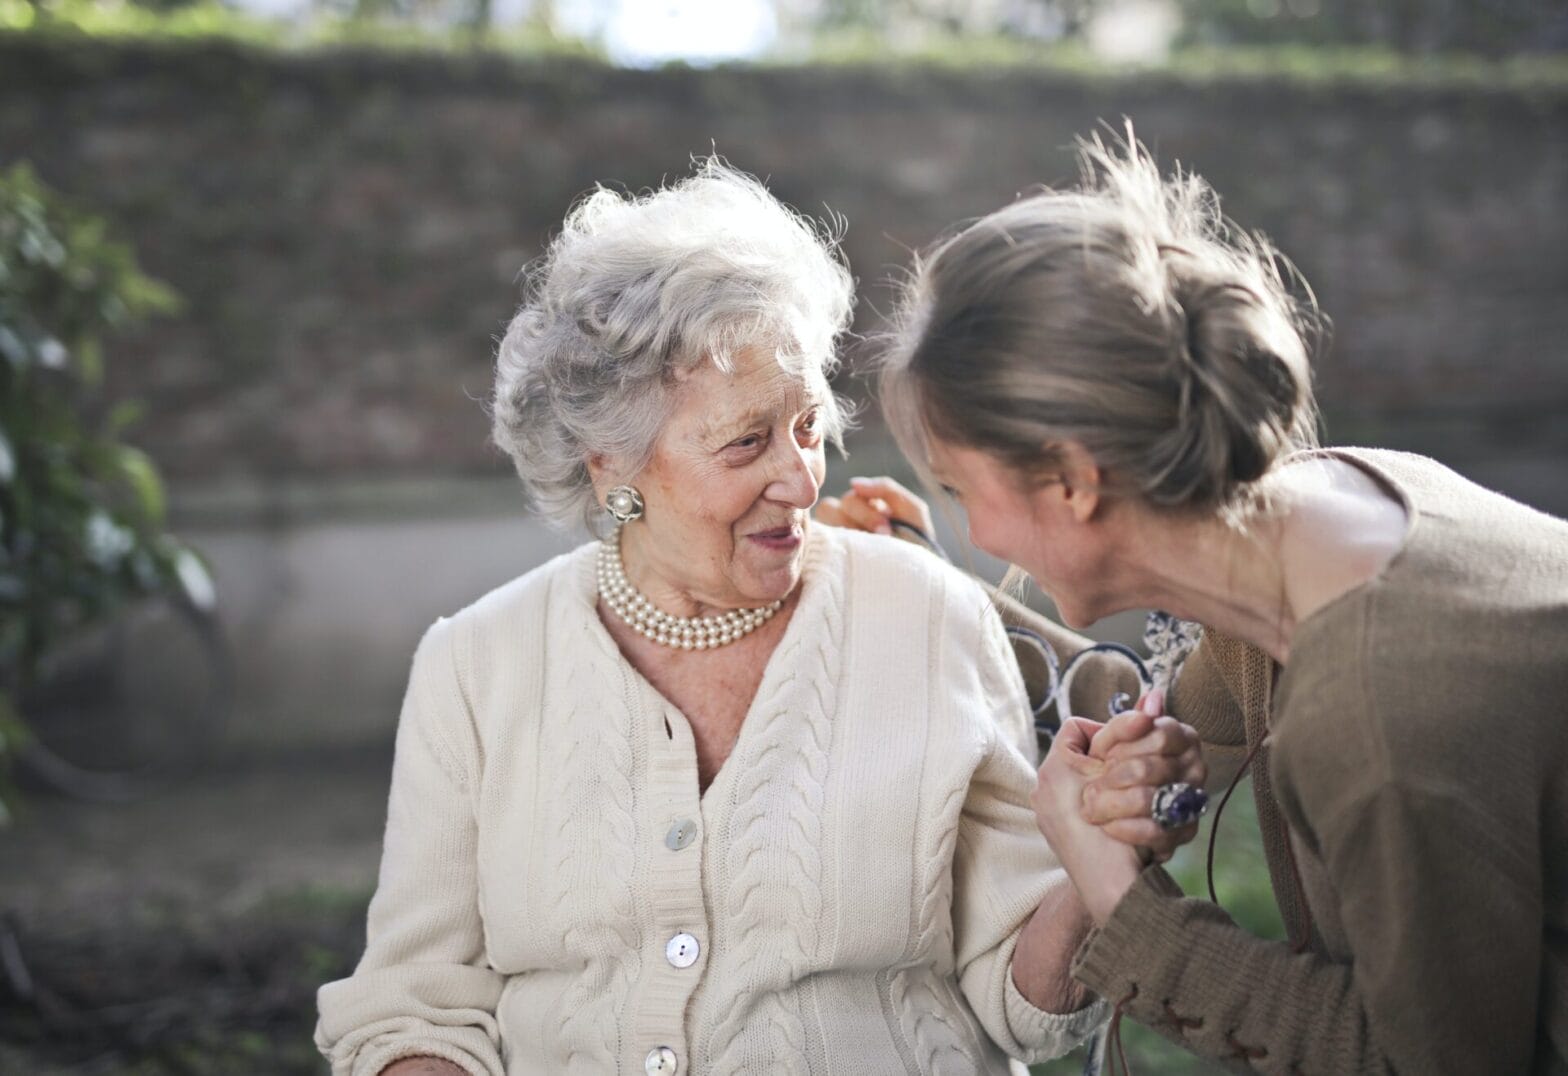 An elderly lady smiling at an adult lady